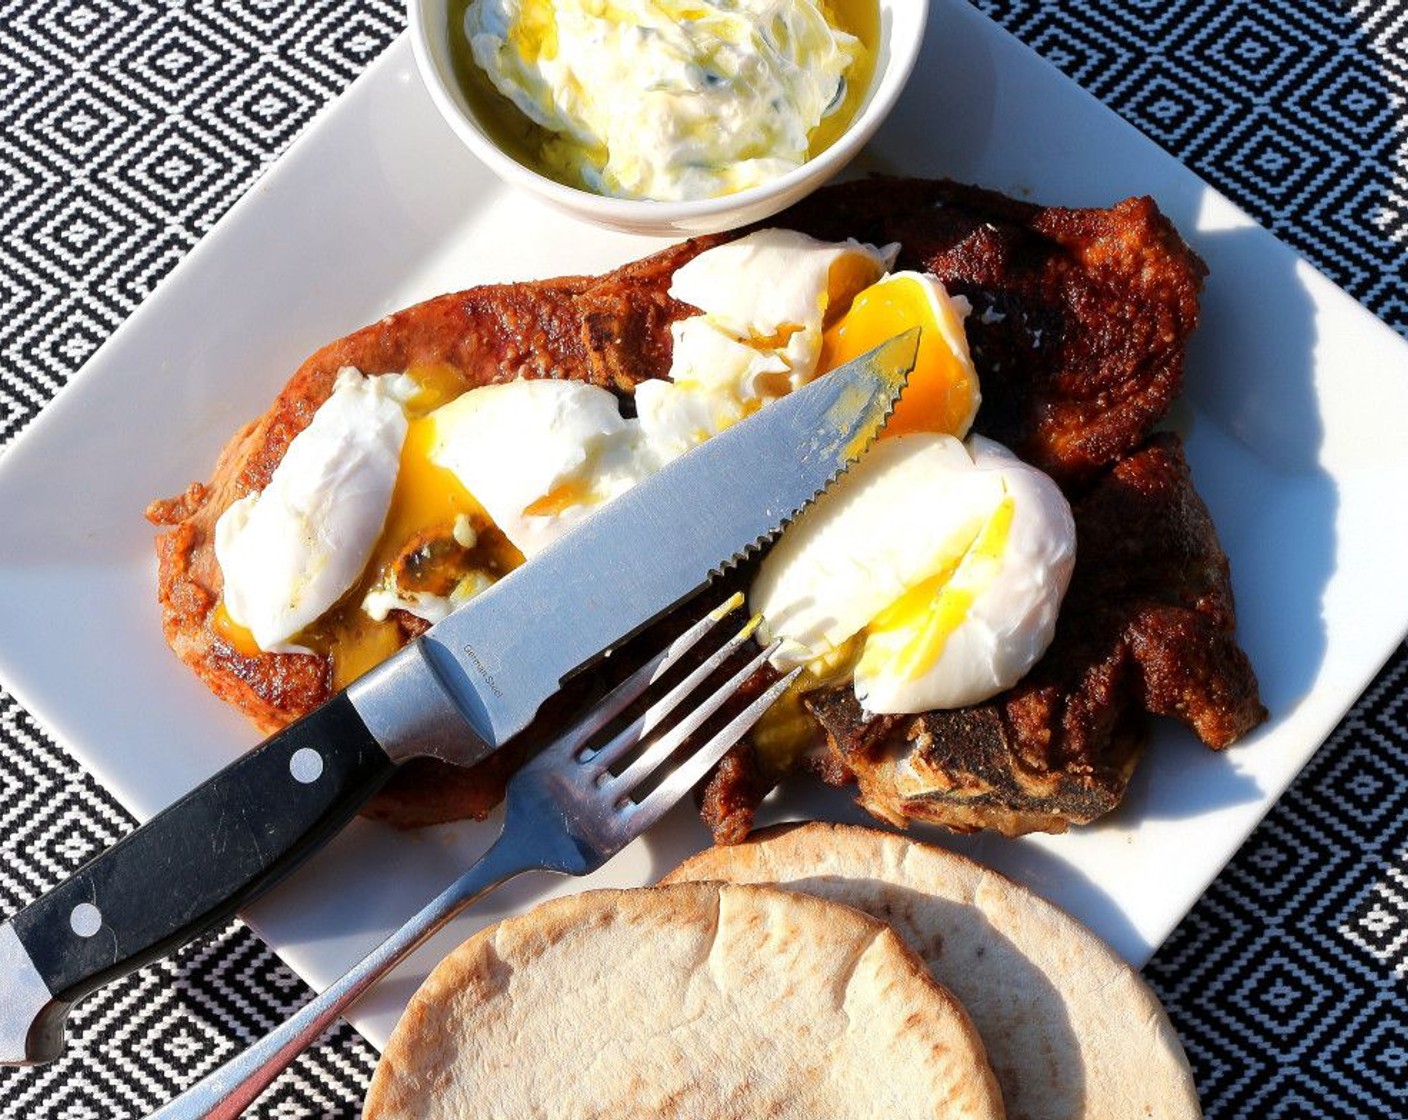 step 8 Top the steak with poached eggs, serve with tzatziki, drizzle with plenty of Extra-Virgin Olive Oil (to taste) and warm pita. Enjoy!